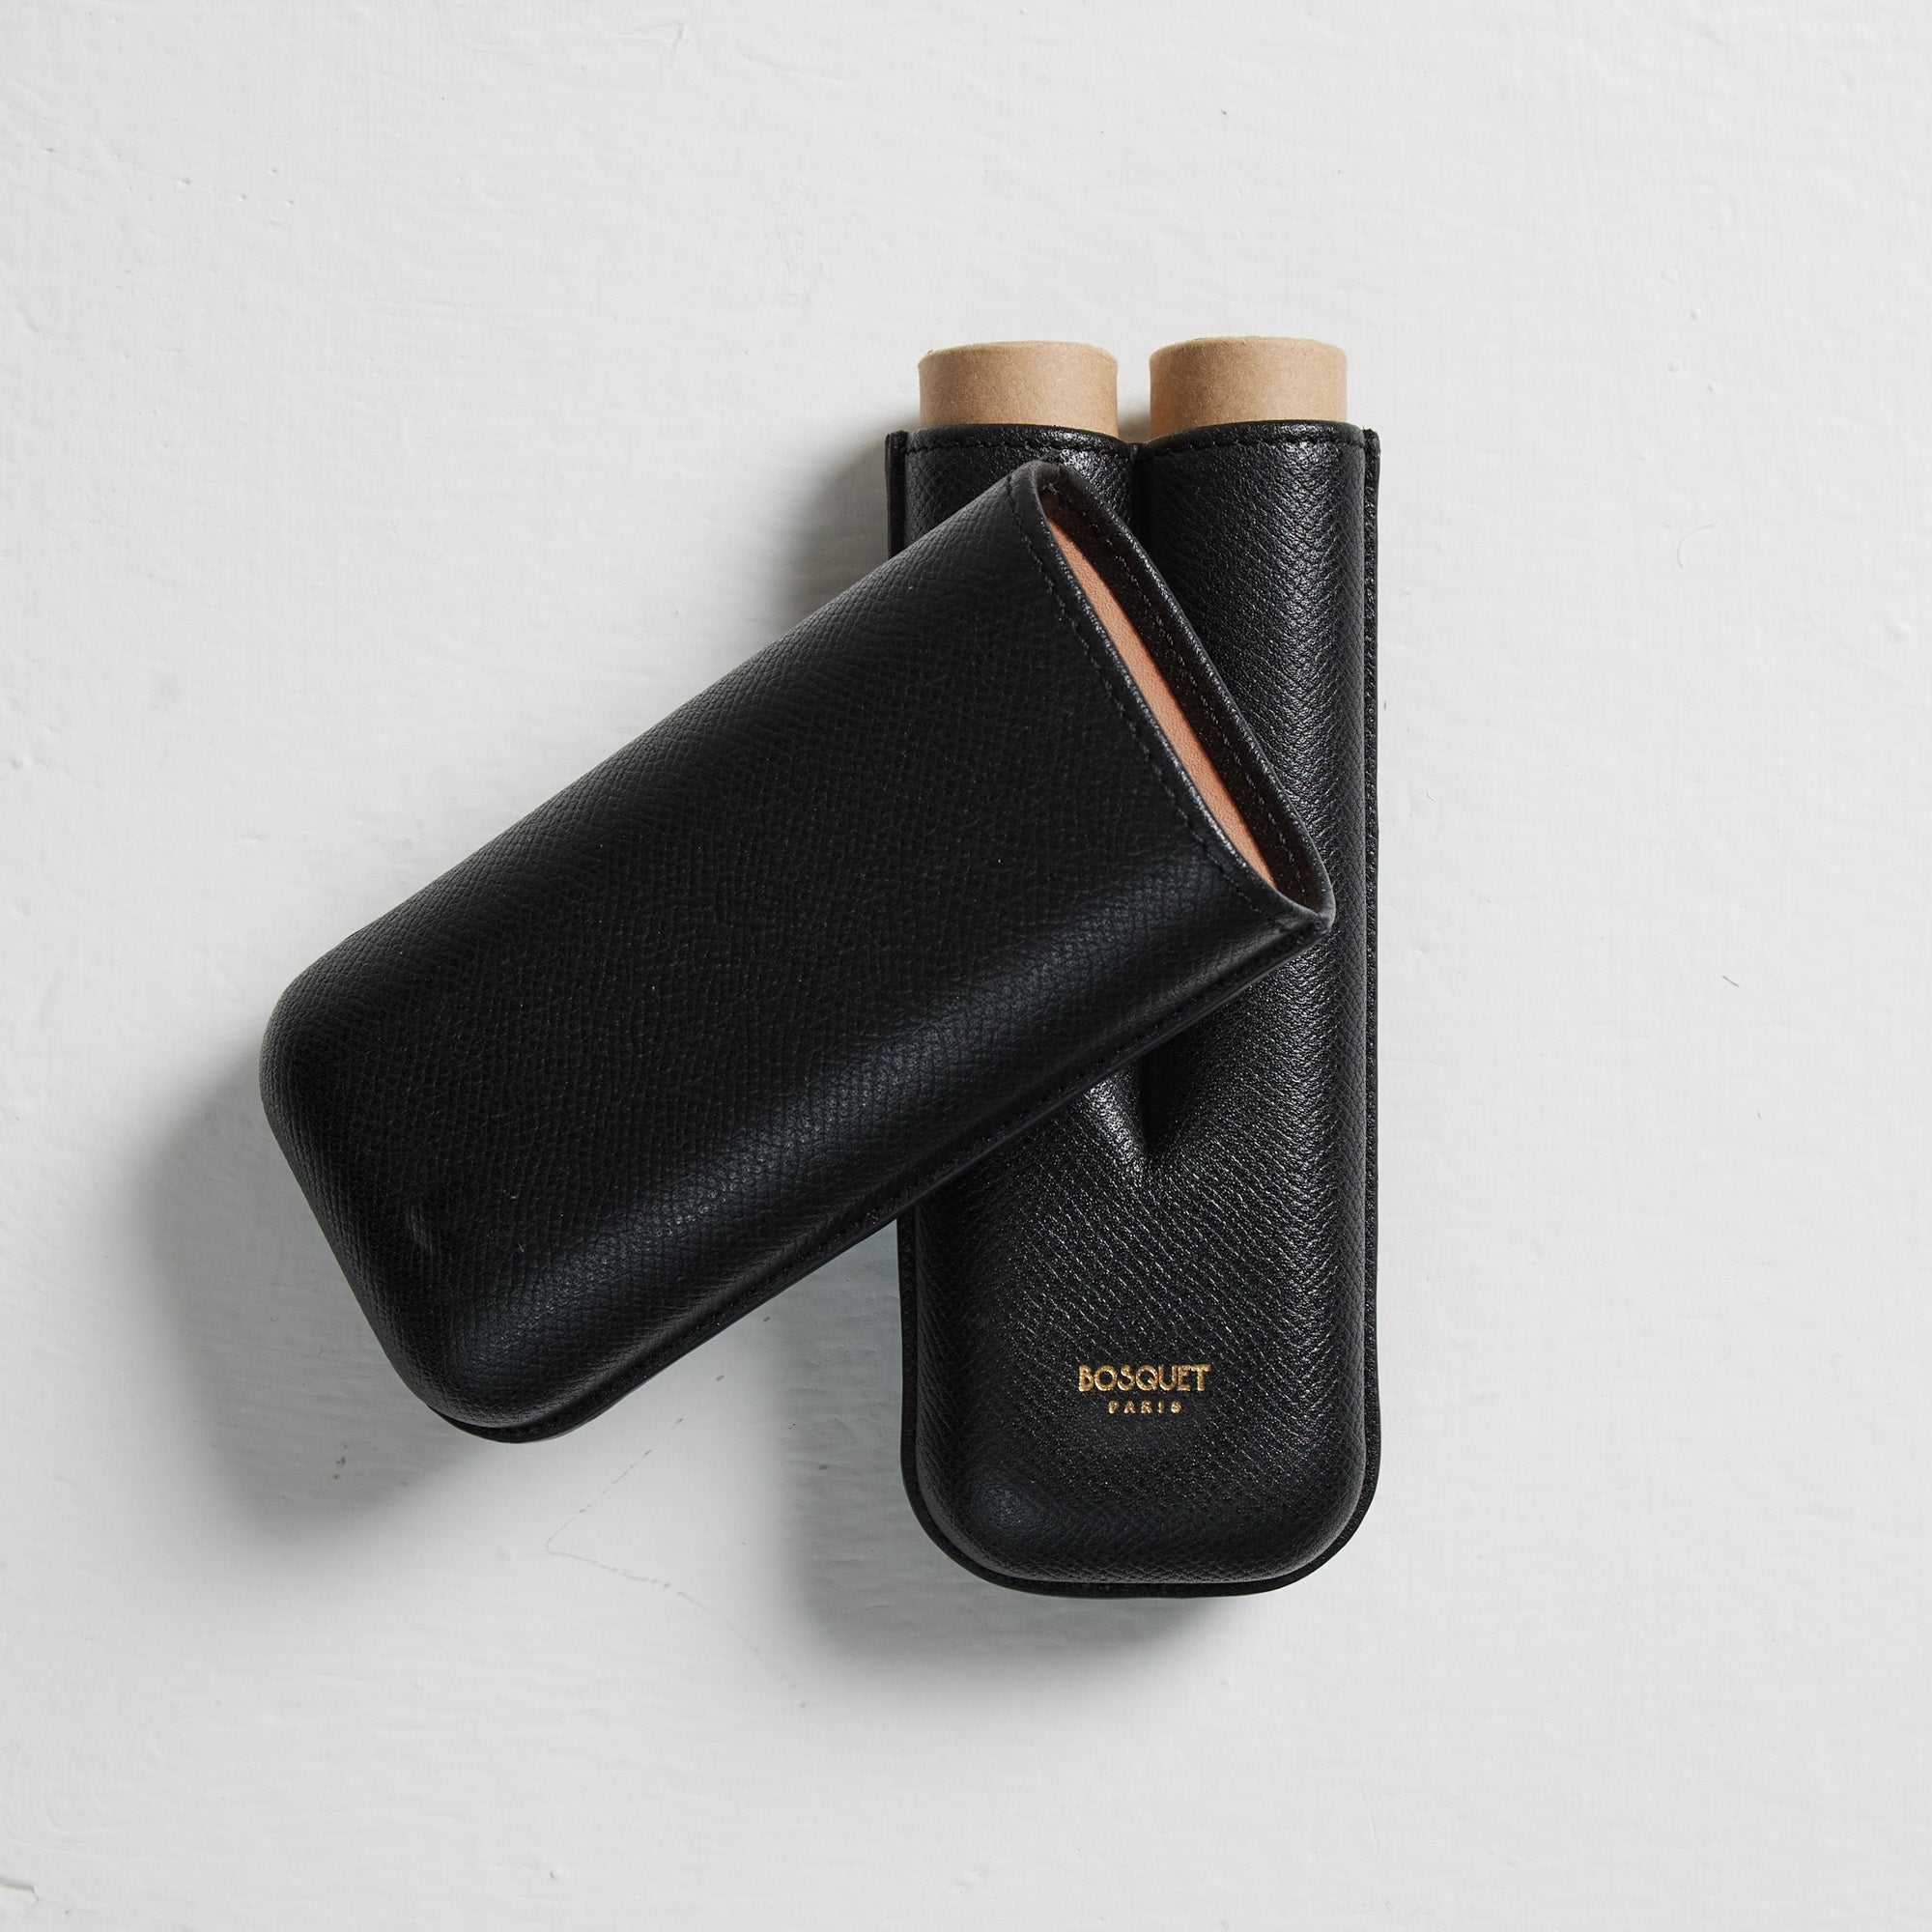 A pair of Bosque Smooth Black Leather Cigar Cases on a white surface.